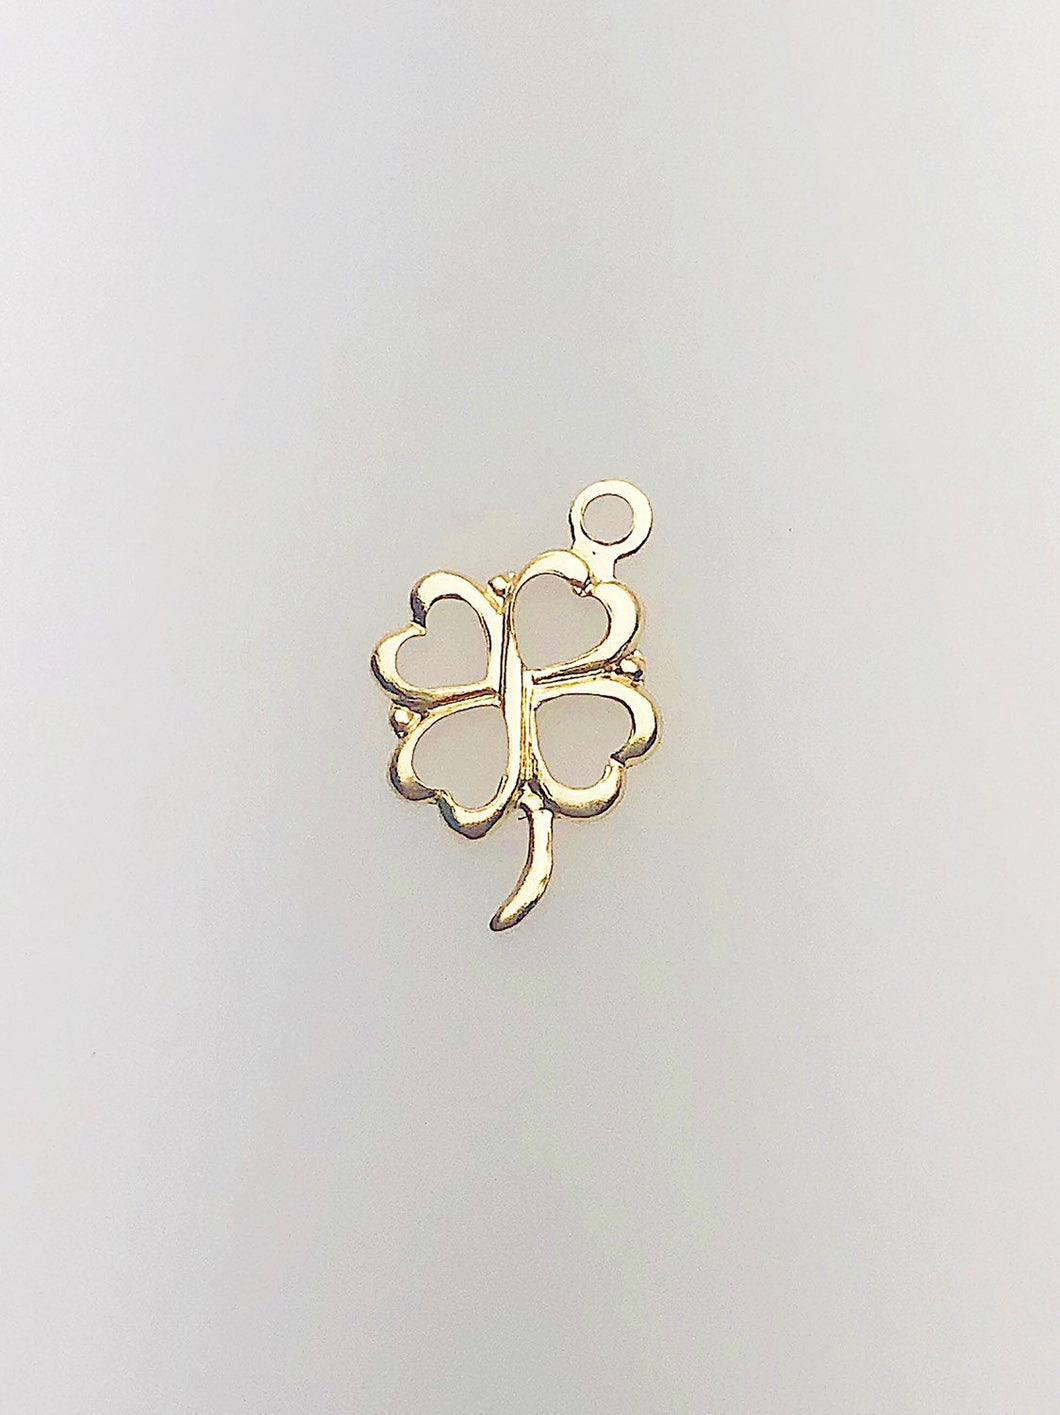 14K Gold Fill Four Leaf Clover Charm w/ Ring, 7.7x10.1mm, Made in USA - 487